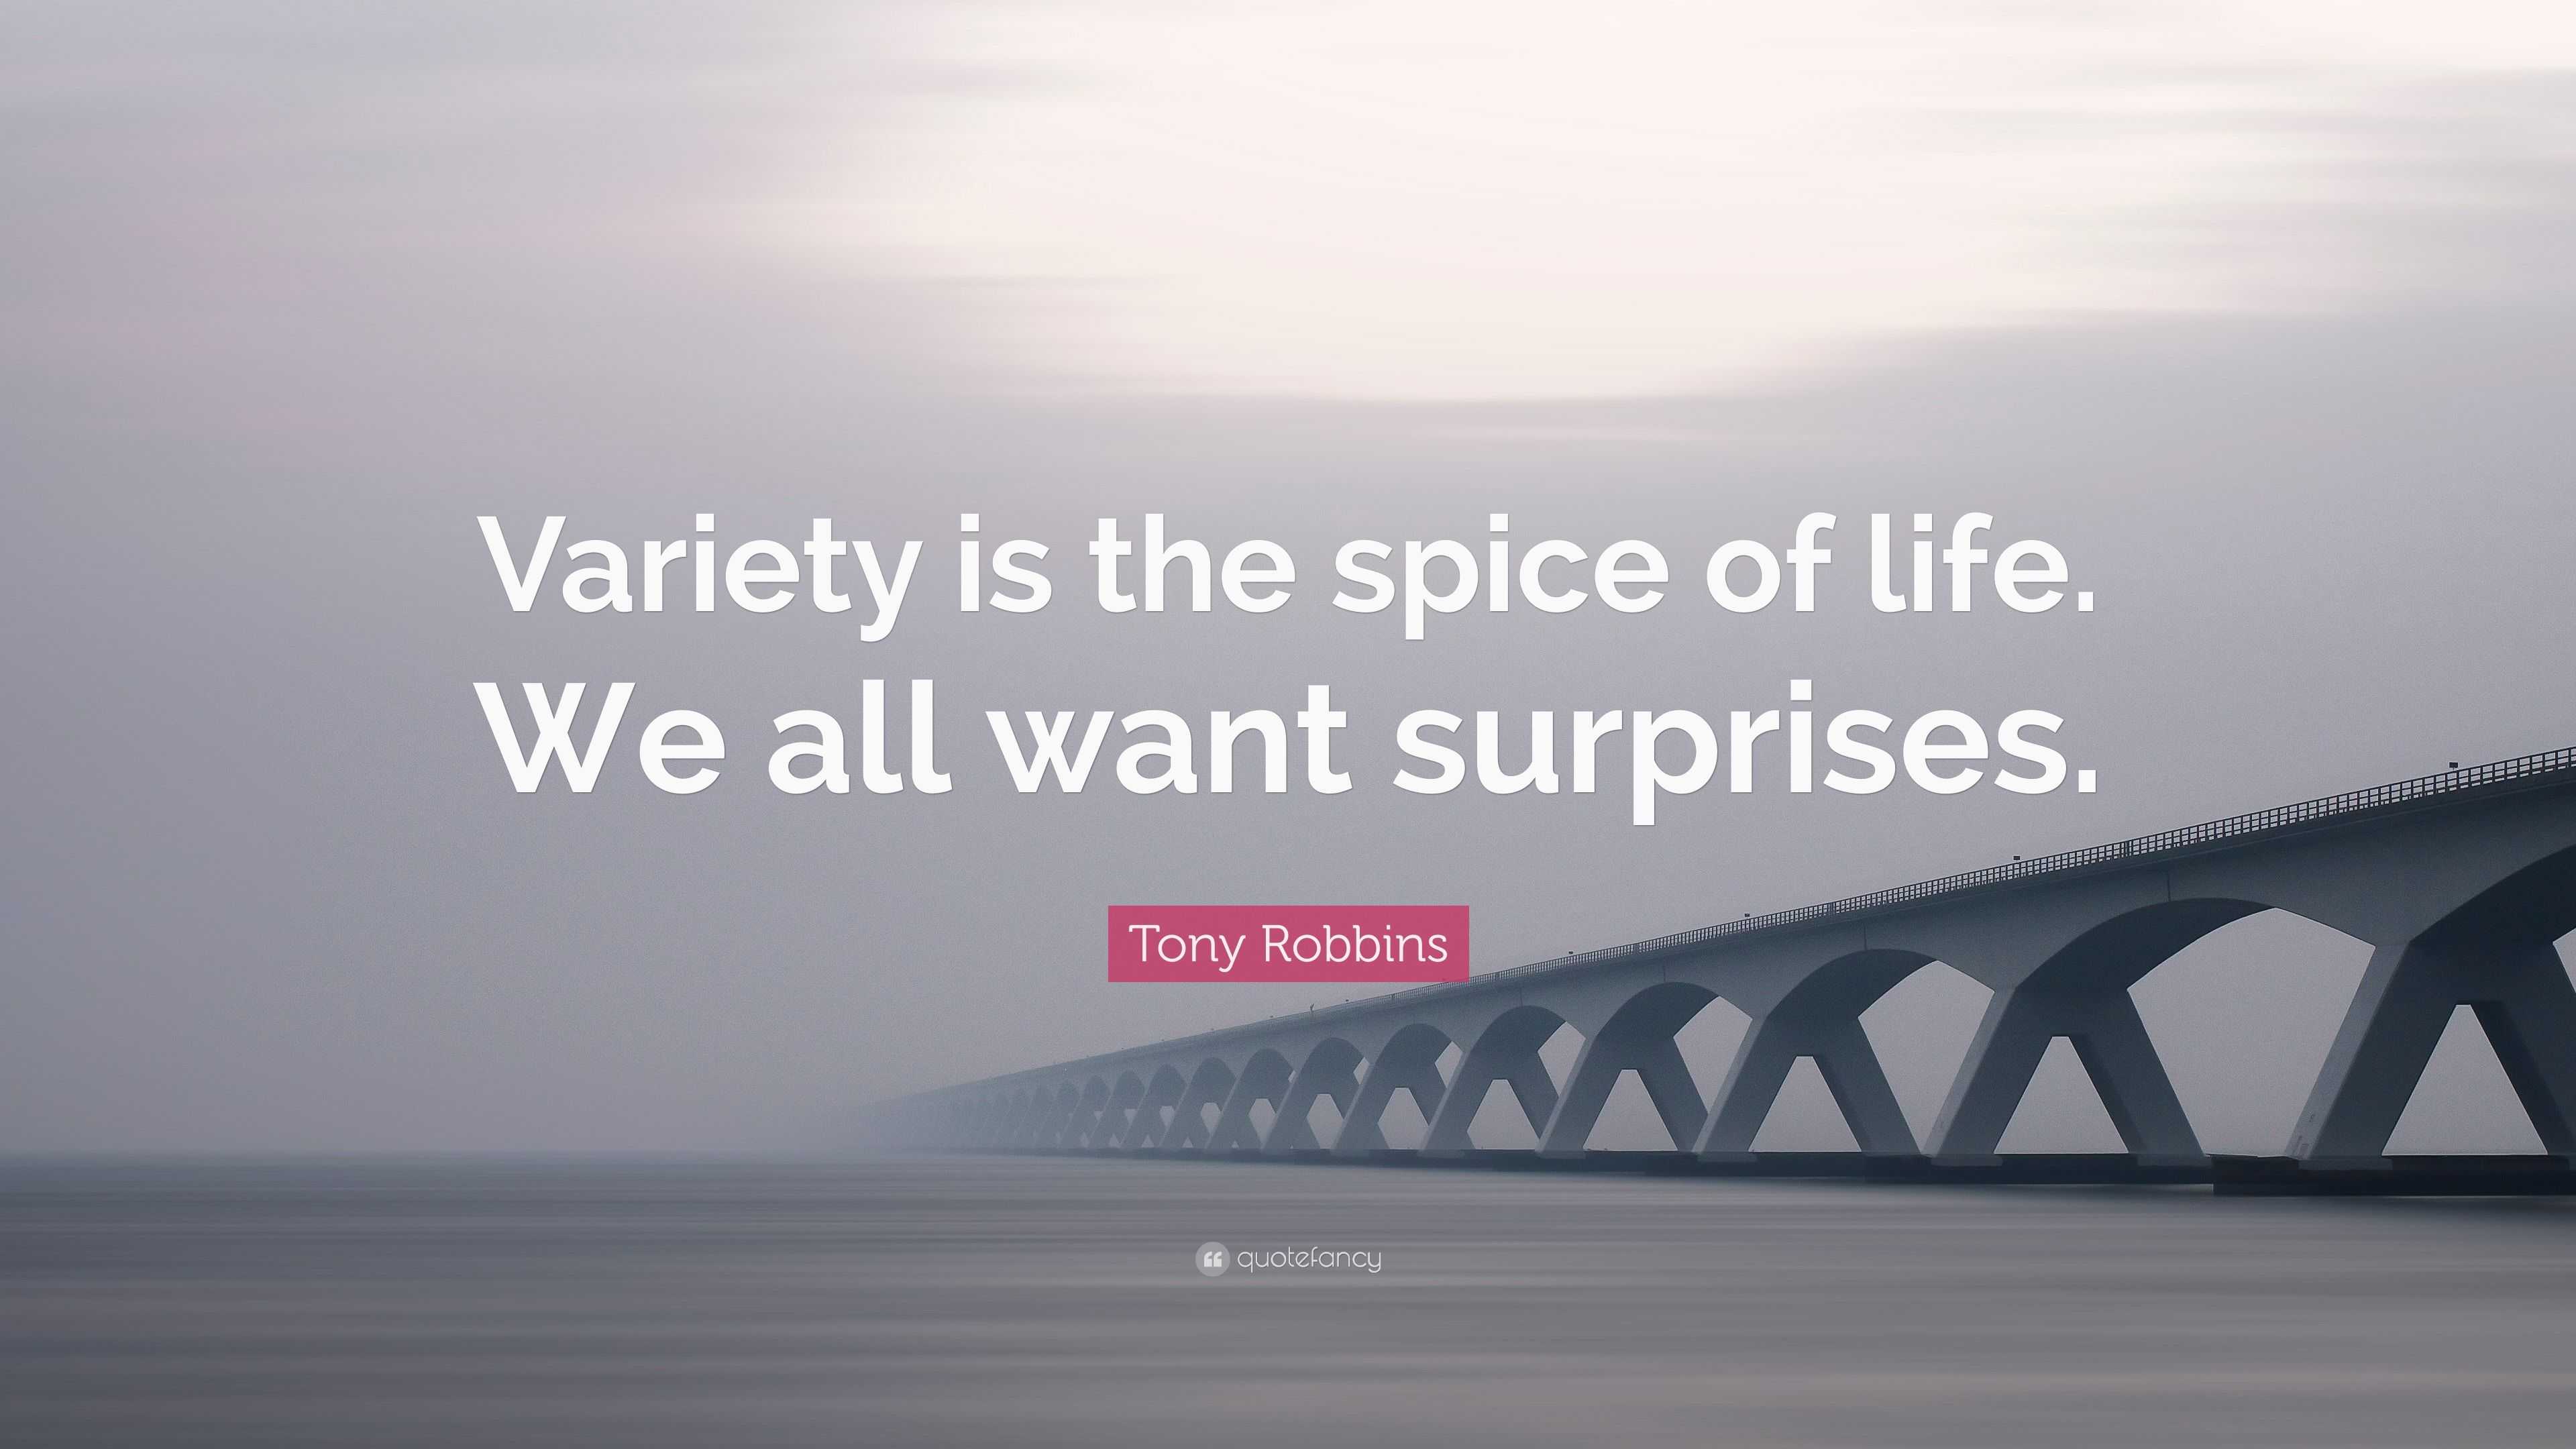 https://quotefancy.com/media/wallpaper/3840x2160/4746715-Tony-Robbins-Quote-Variety-is-the-spice-of-life-We-all-want.jpg